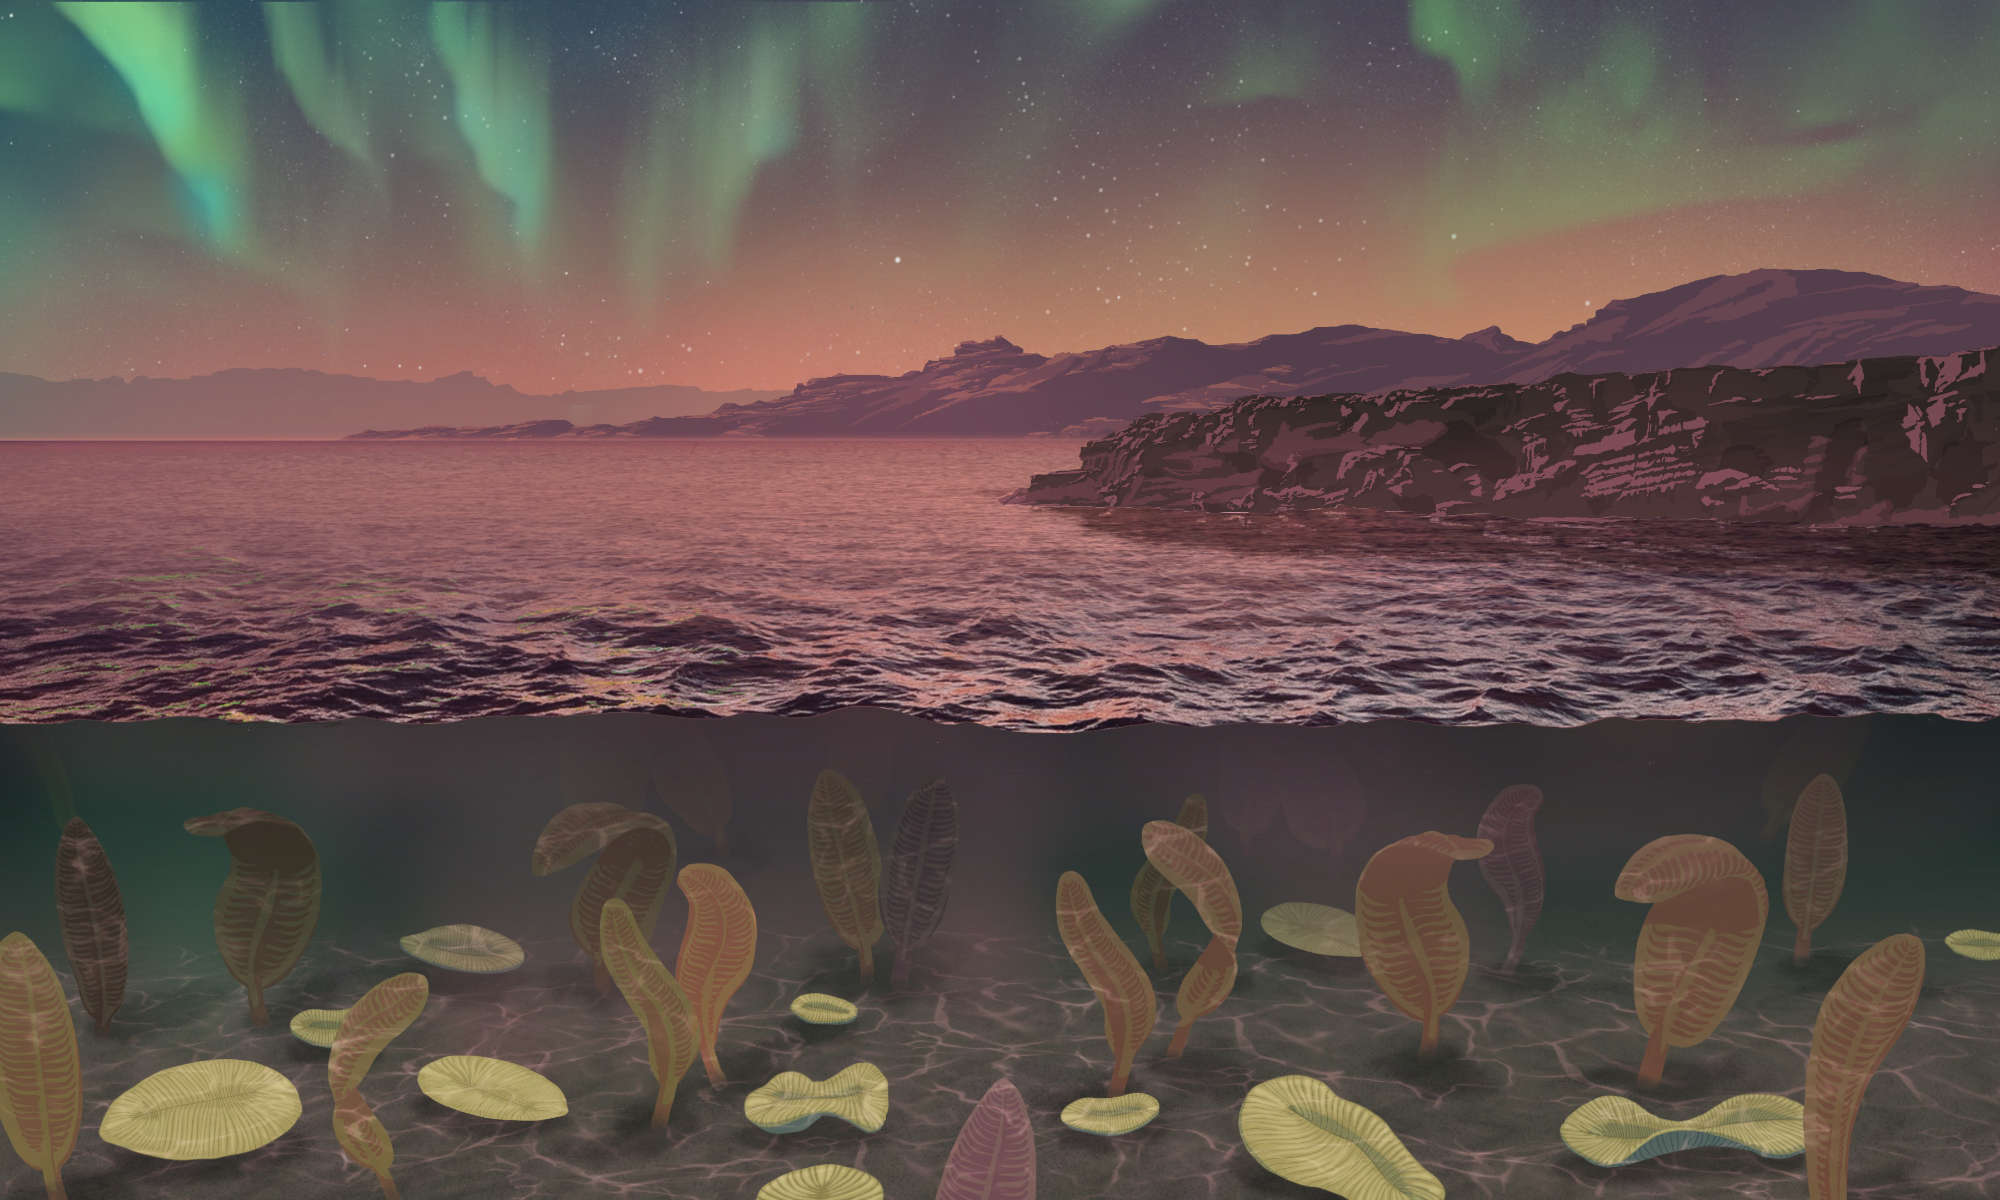 Illustration of a cross-section of the ocean featuring Ediacaran fauna, including Dickinsonia, under water while an aurora shines in the sky.